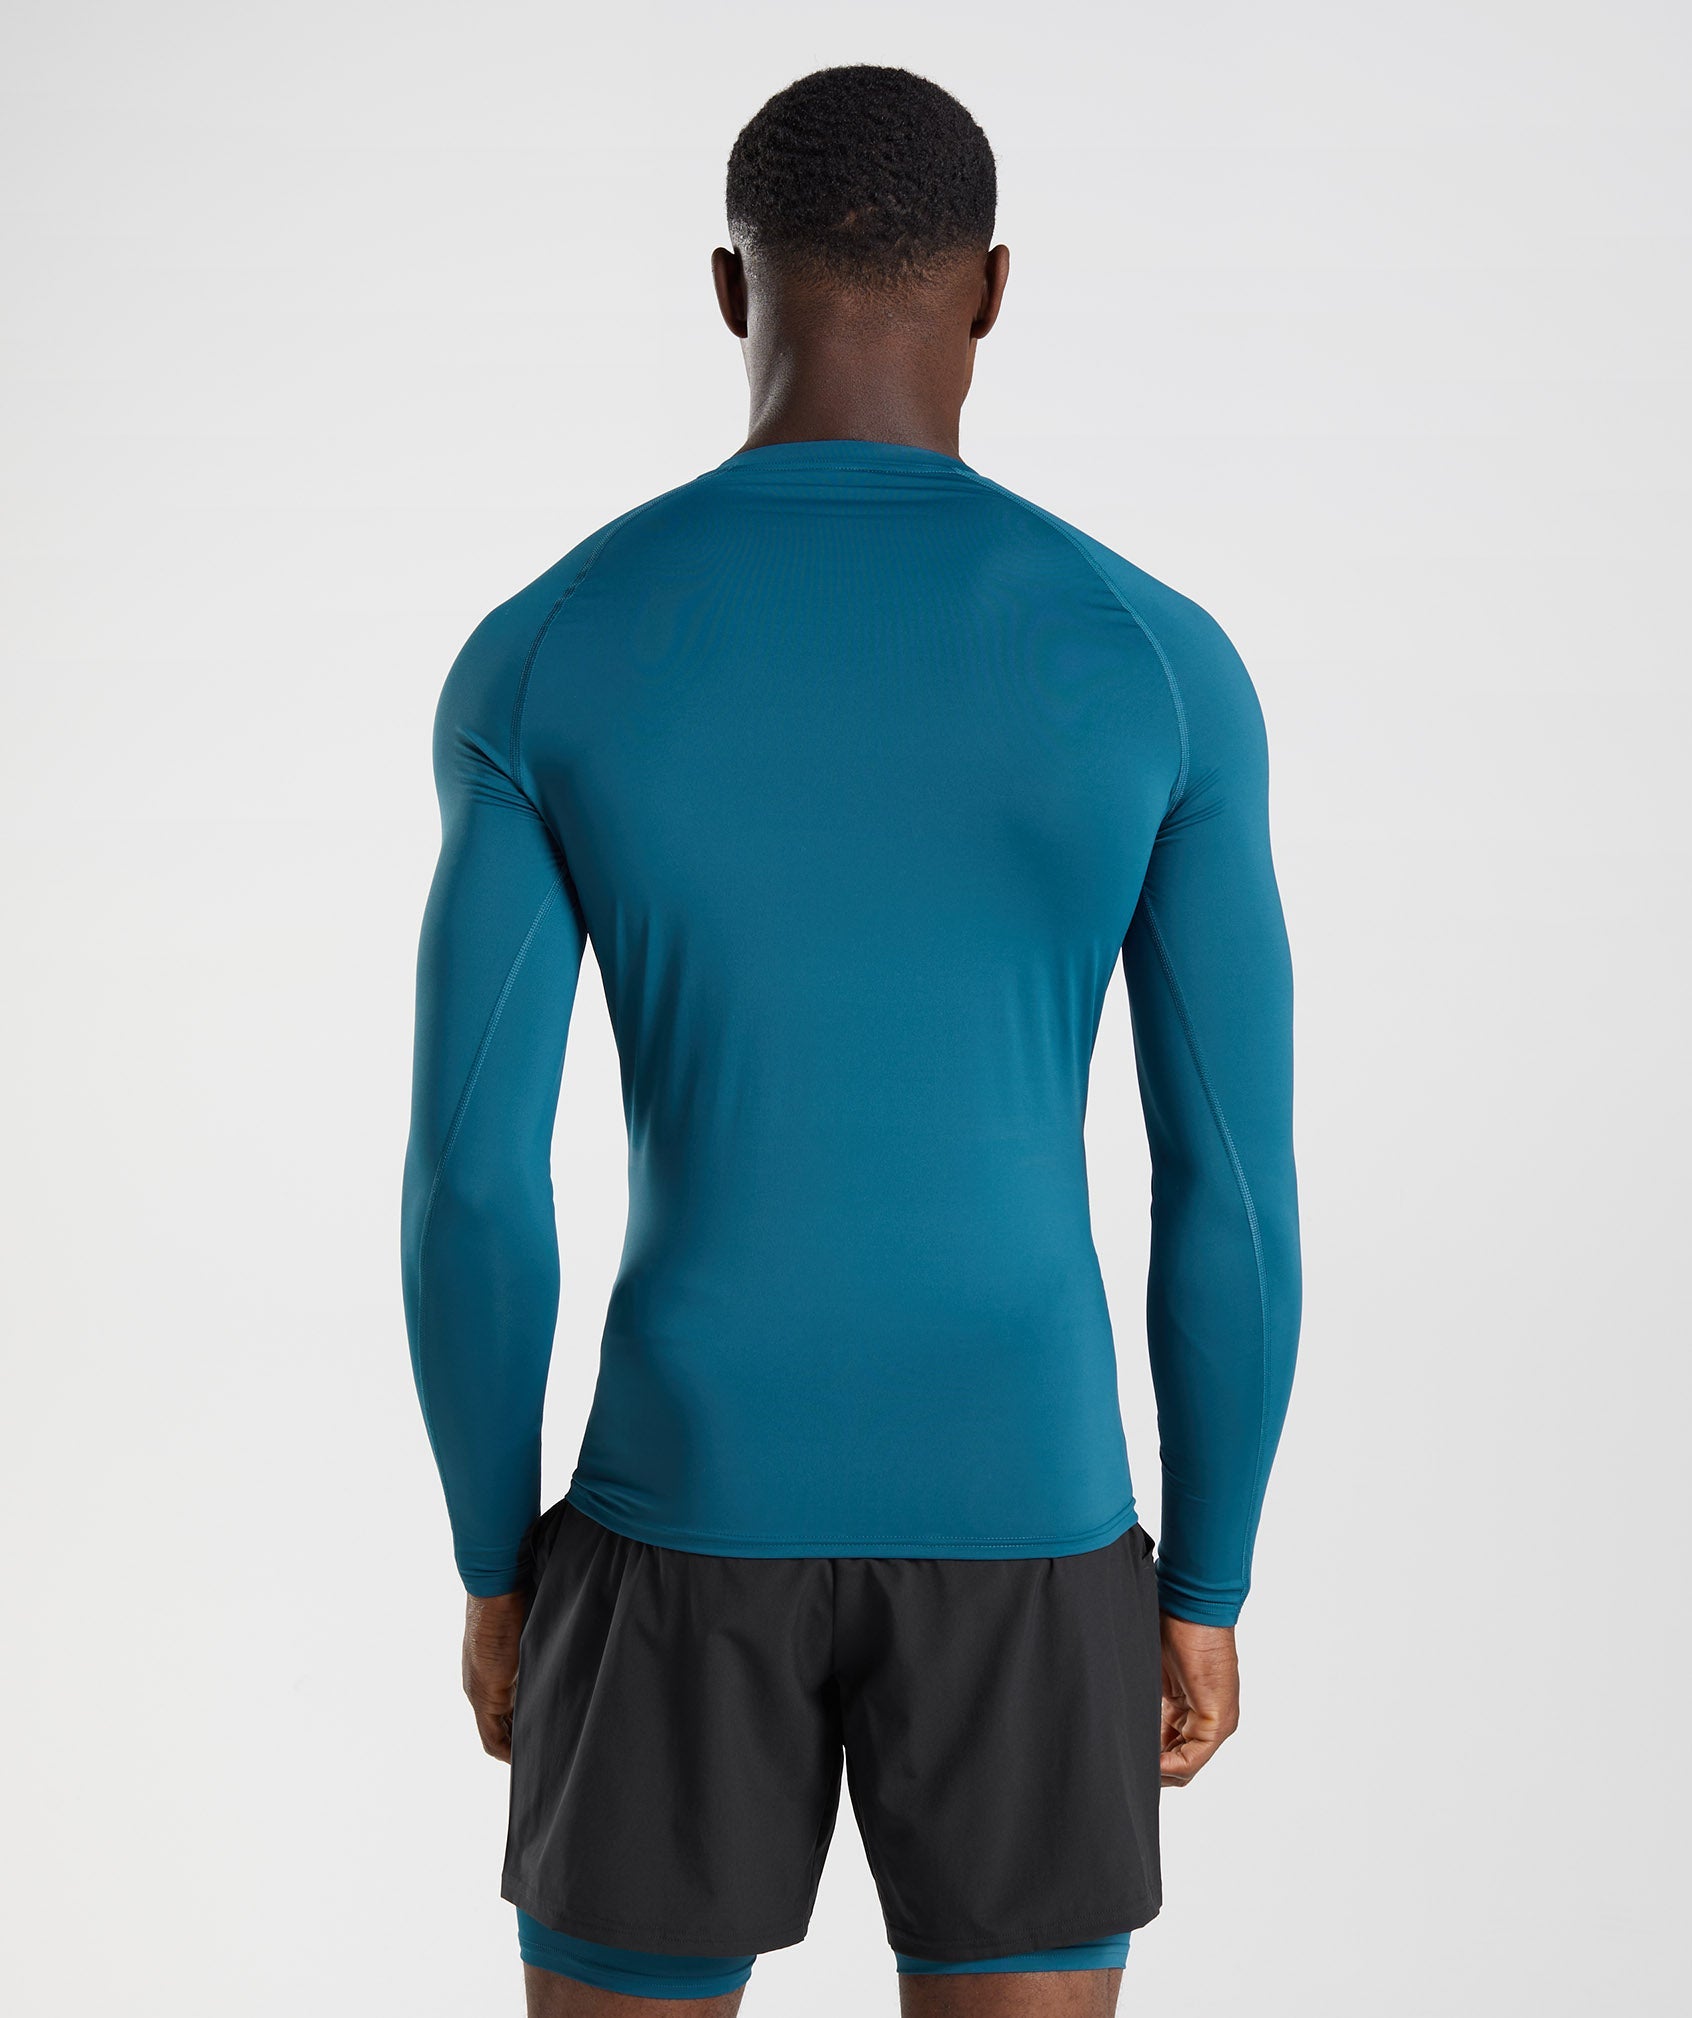 Element Baselayer Long Sleeve Top in Atlantic Blue - view 2